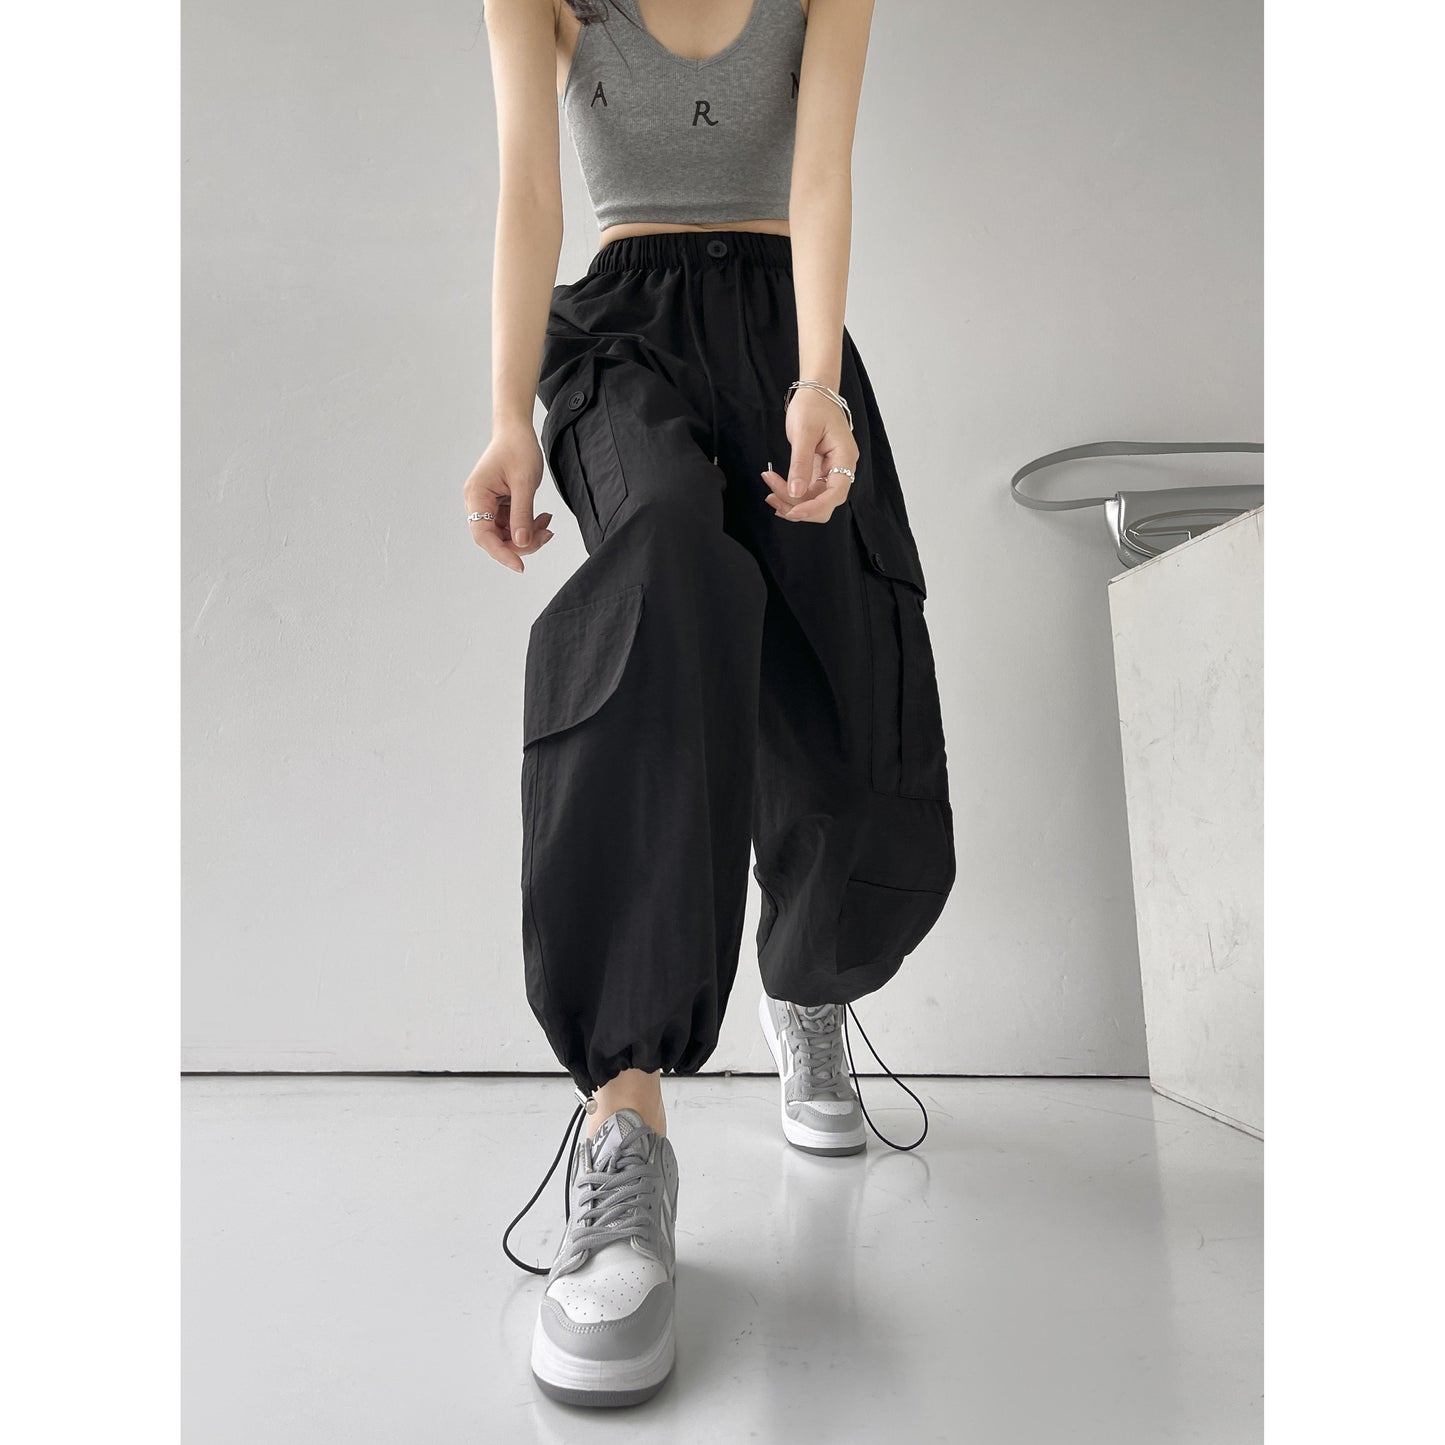 Loose Fit Casual Classic Multi-Pocket Trendy Pants